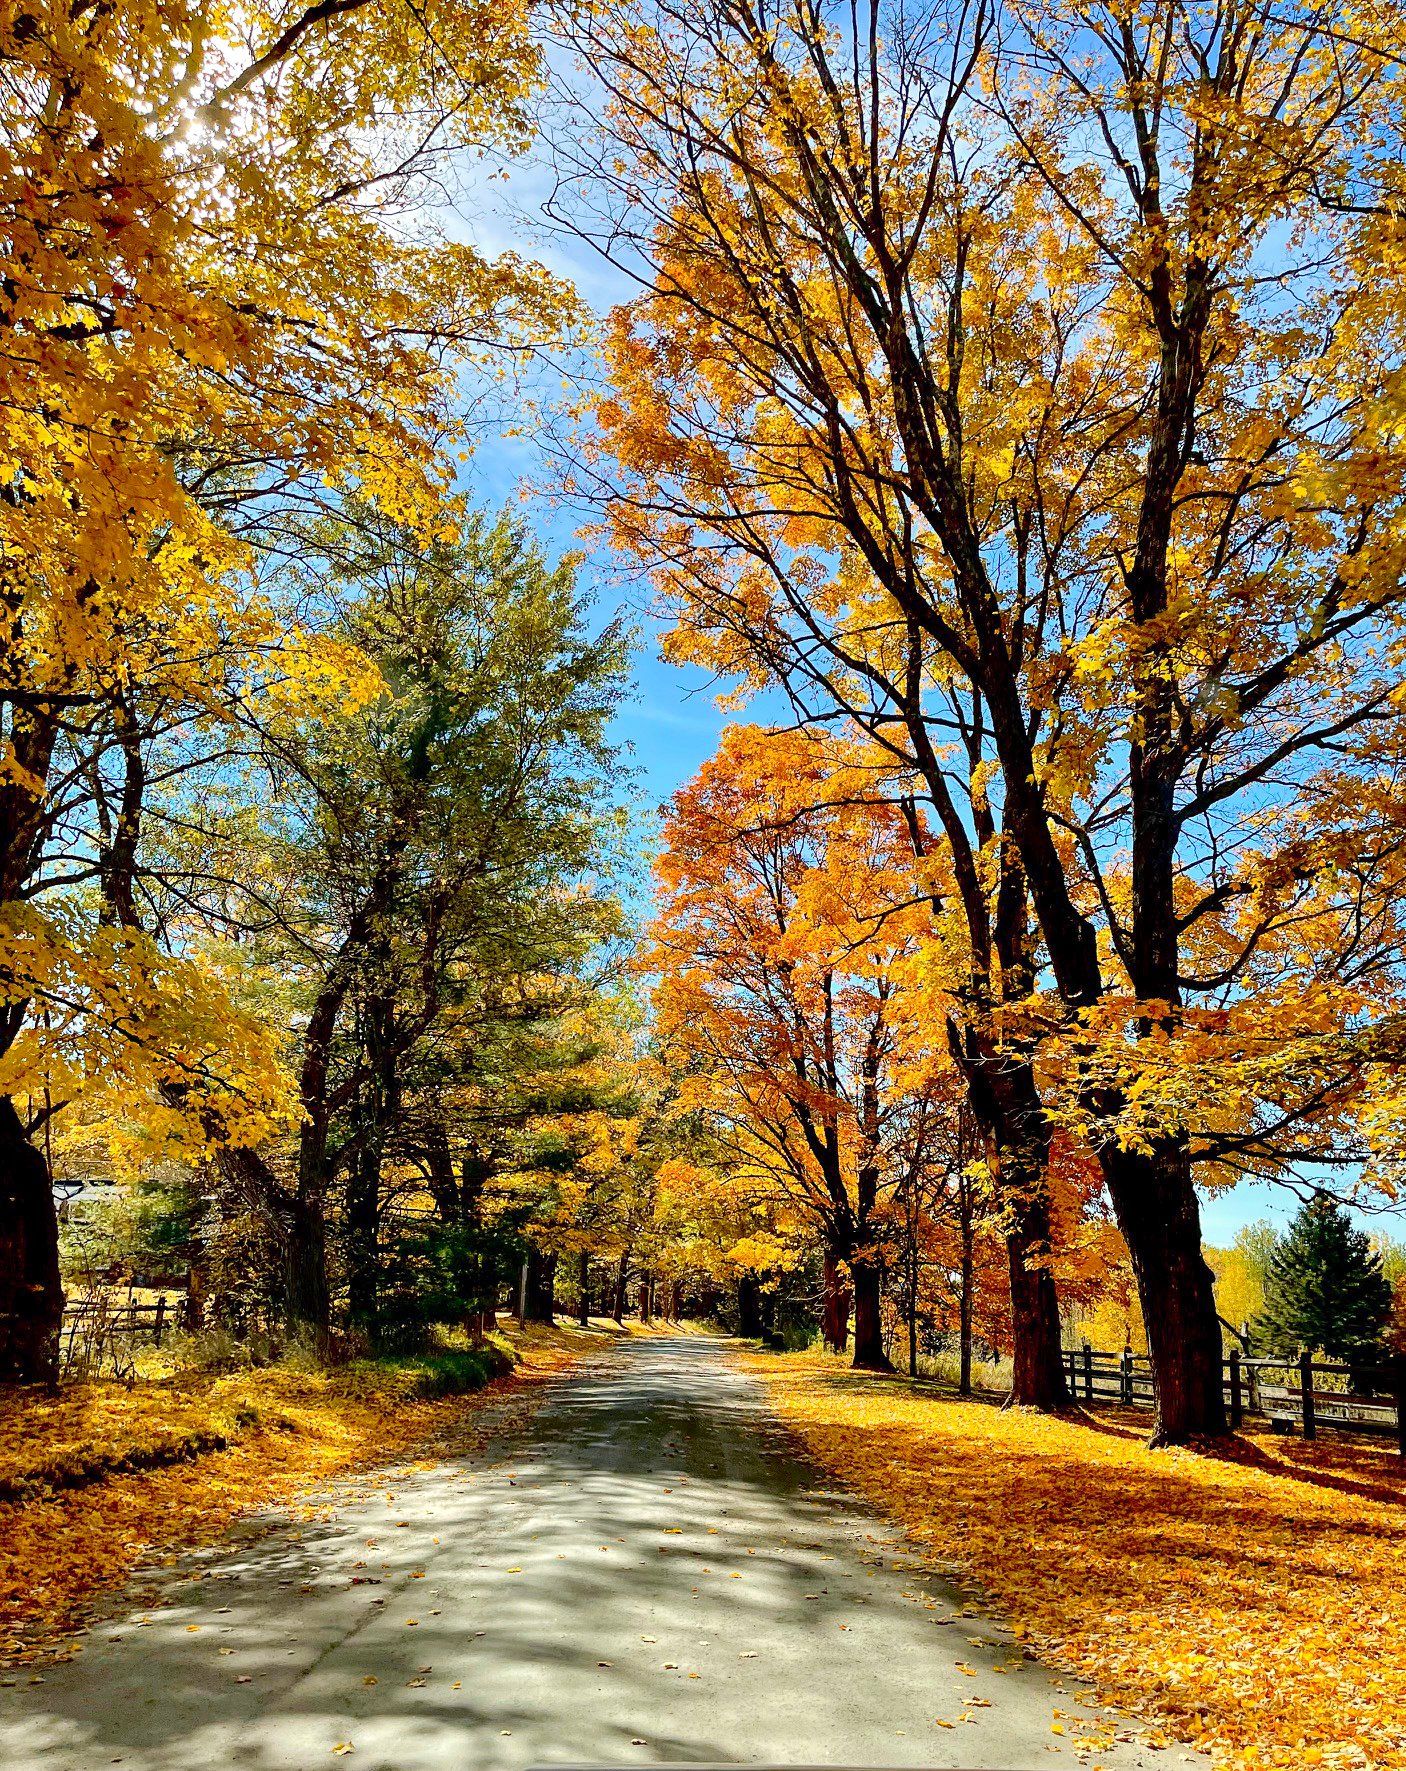 A country road with big maple trees changing into vibrant reds, oranges and yellows in the fall